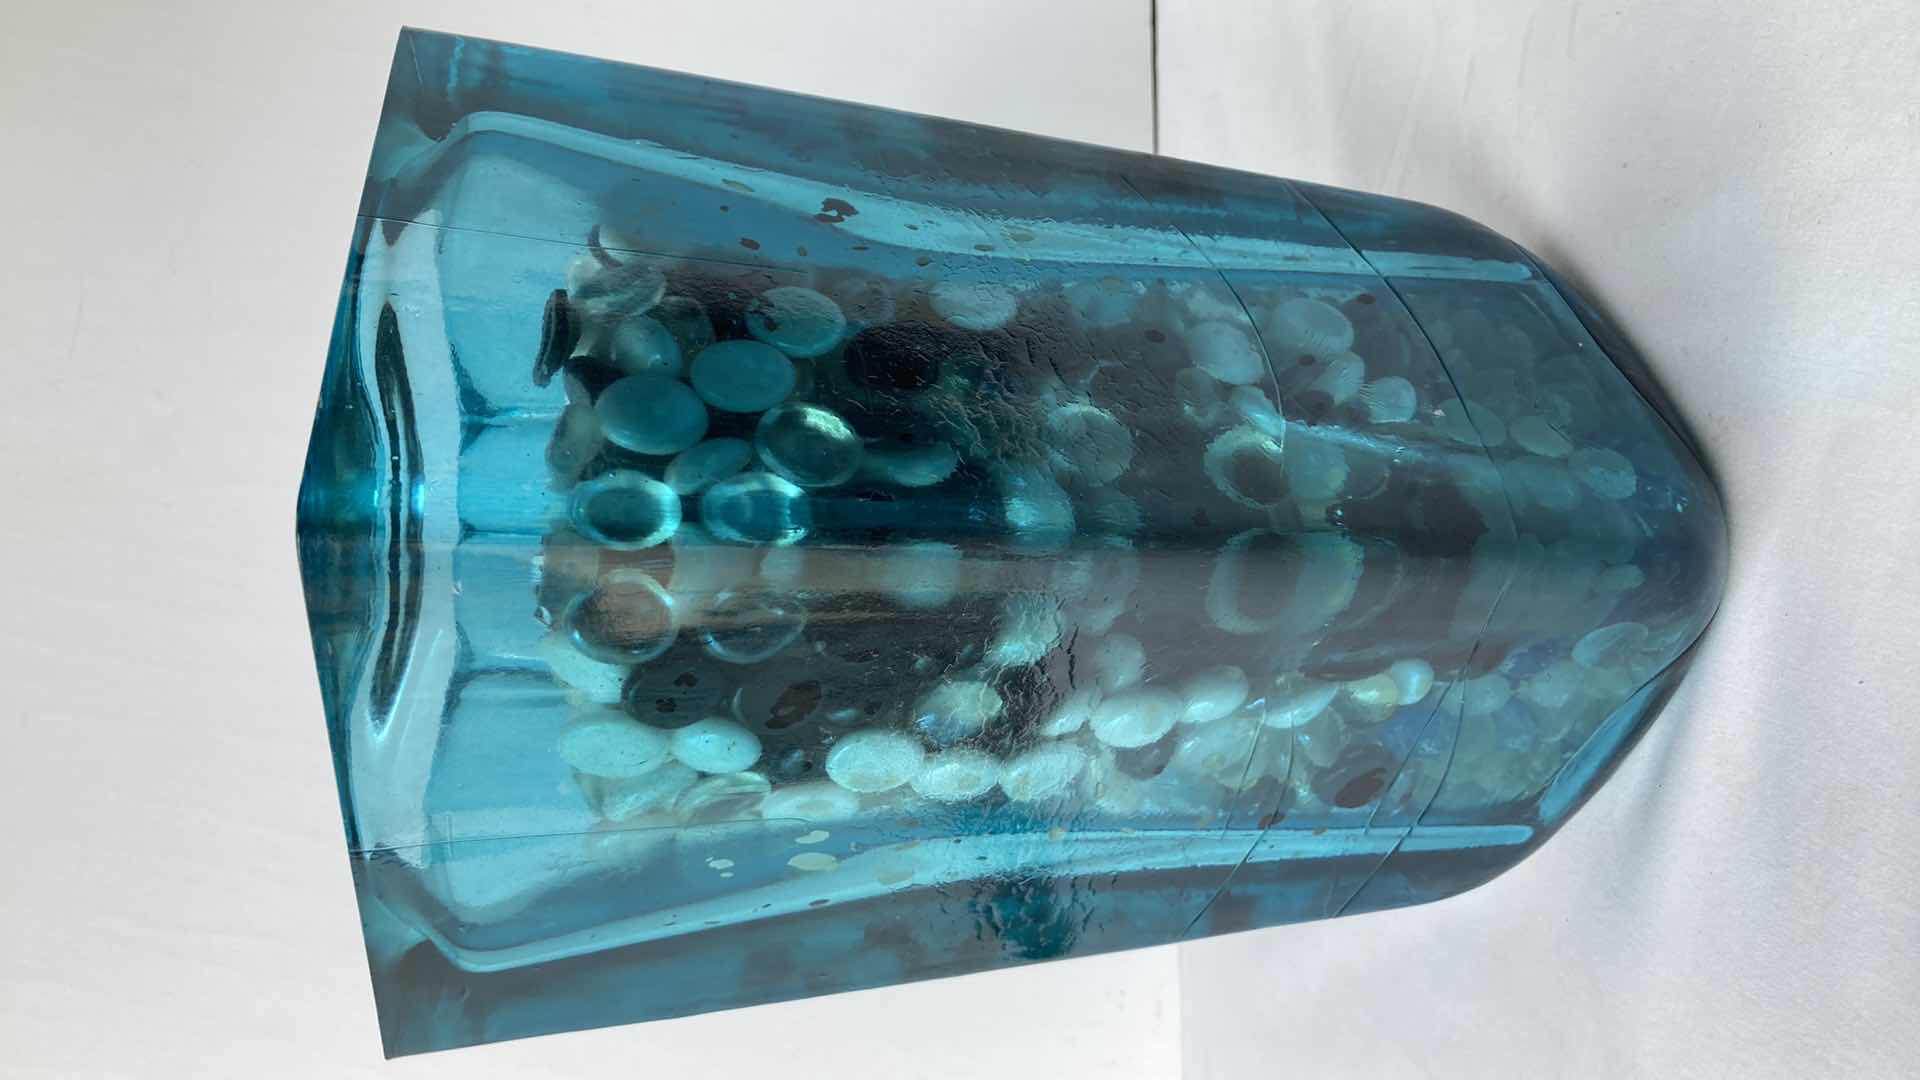 Photo 4 of TEAL CLEAR GLASS VASE W MARBLES 6.5” X 6.5” H11”